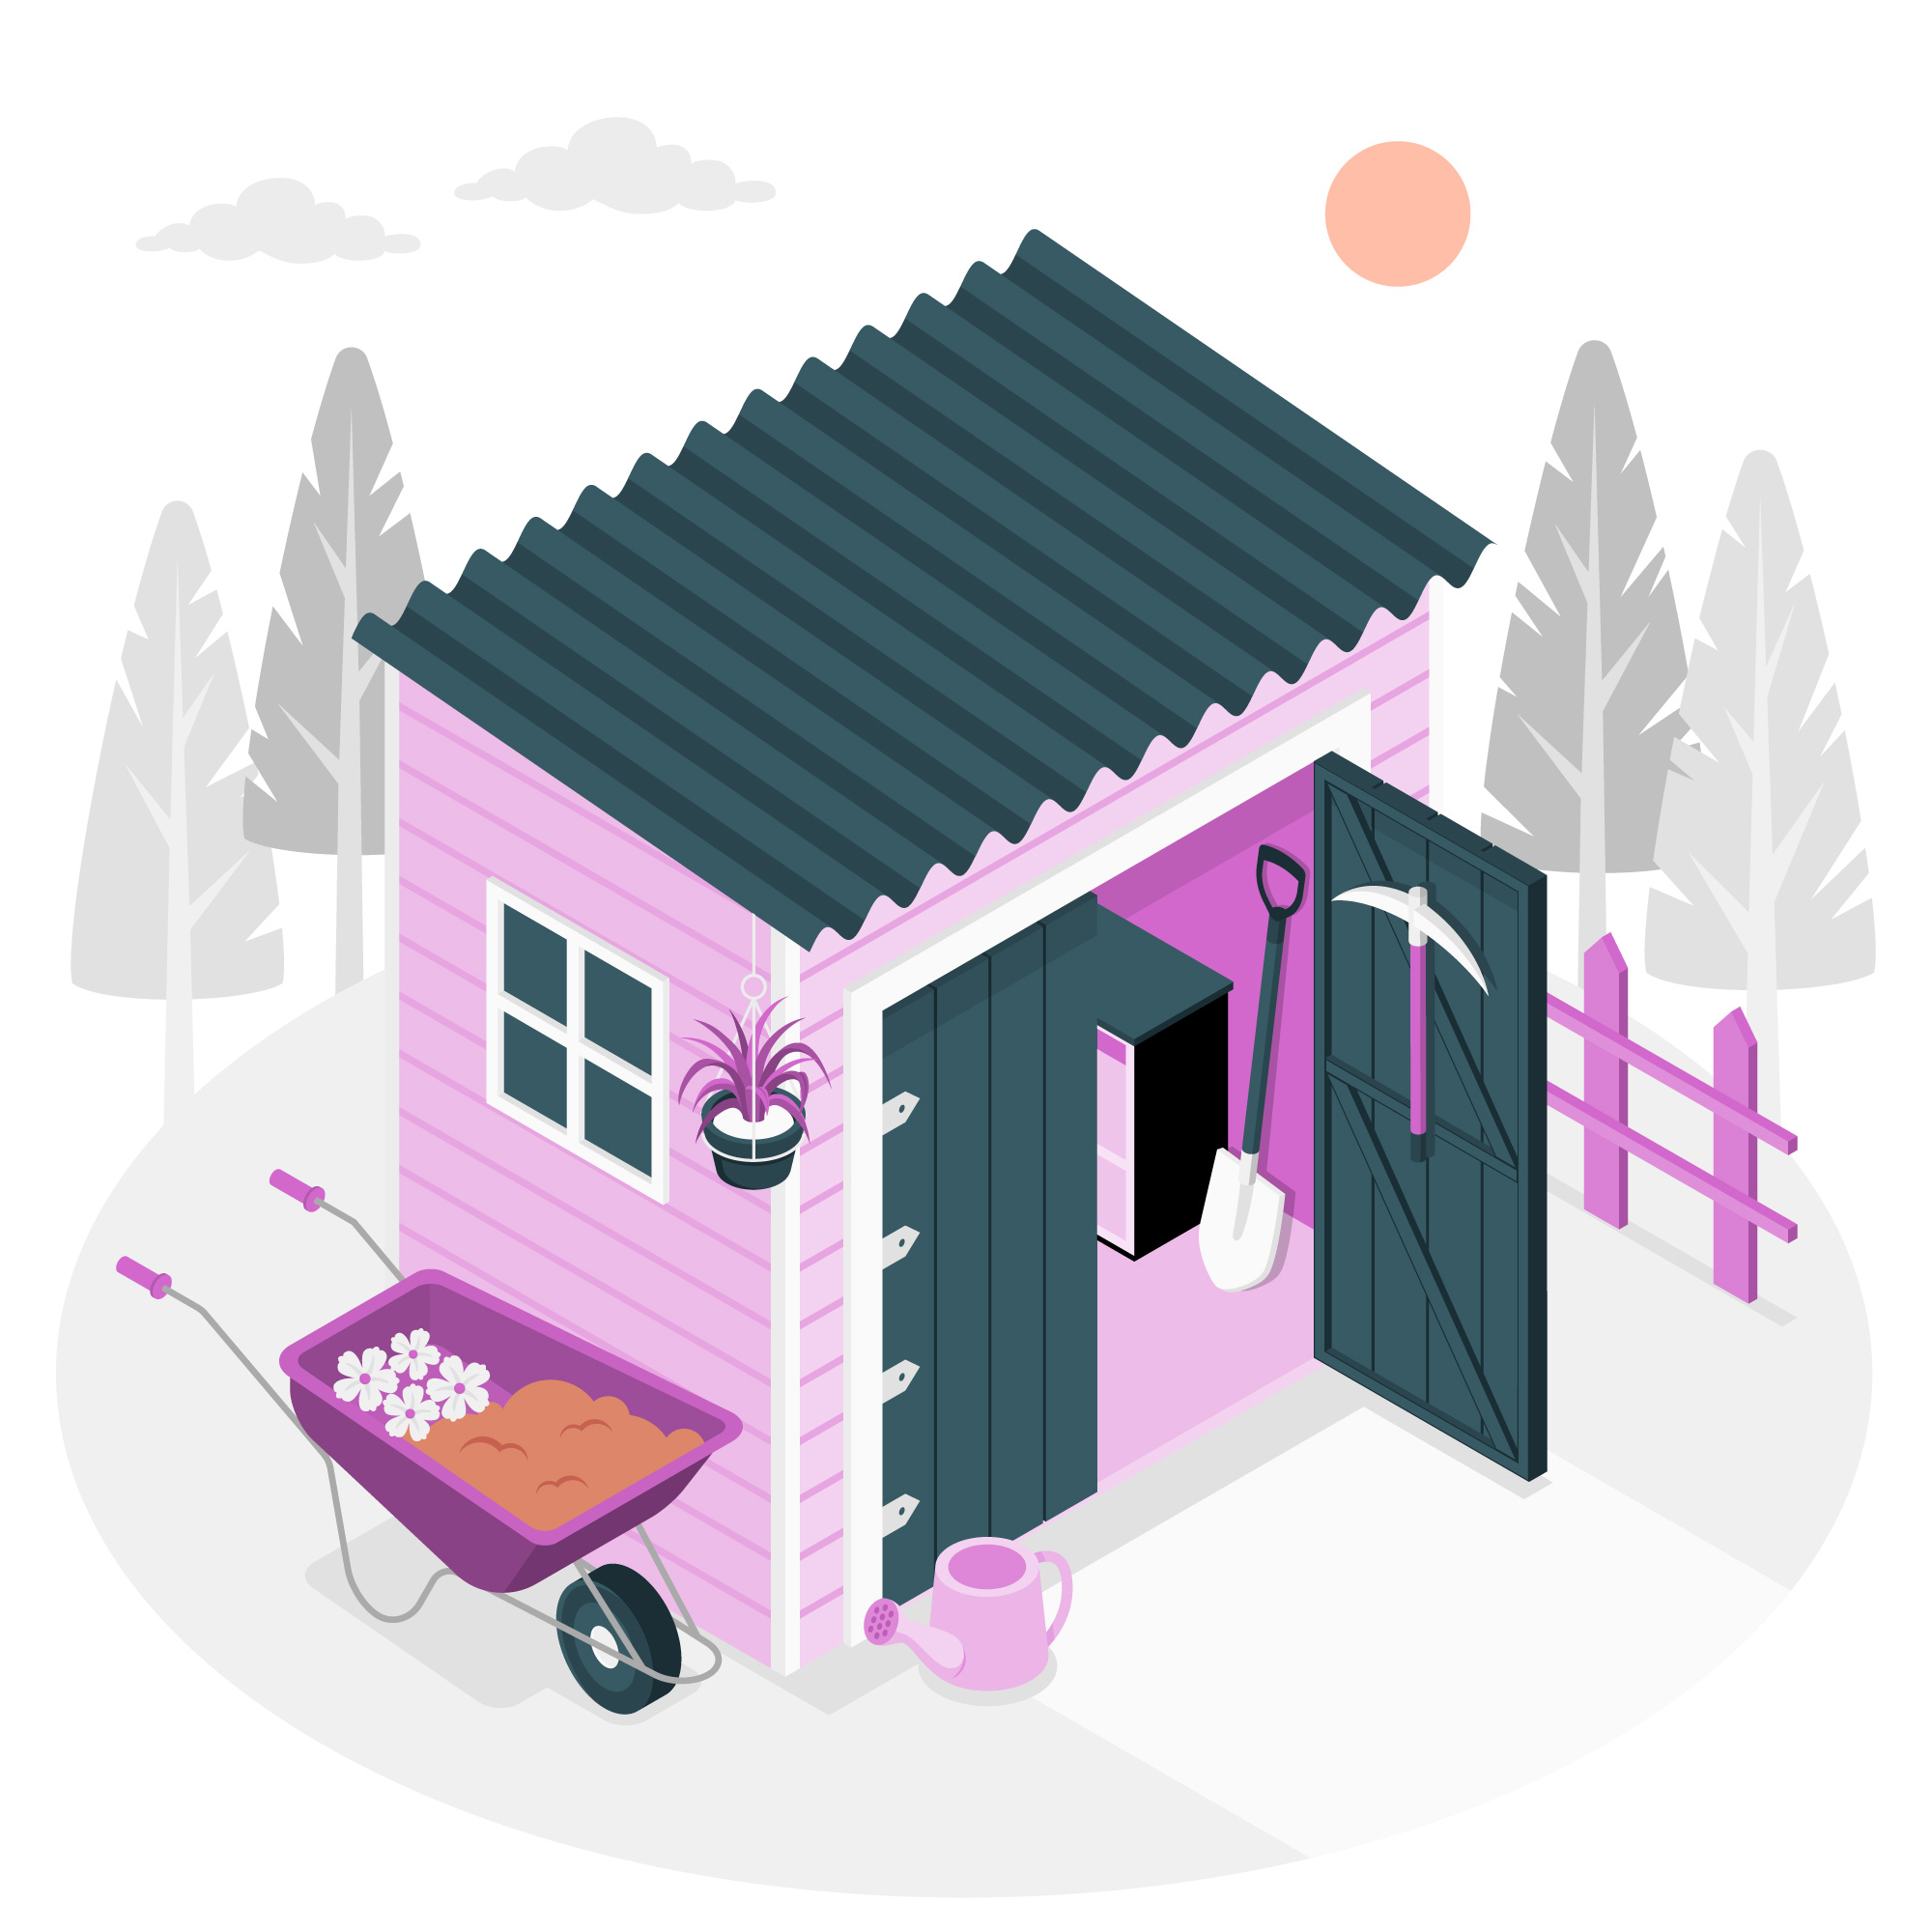 Small wooden pink shed illustration